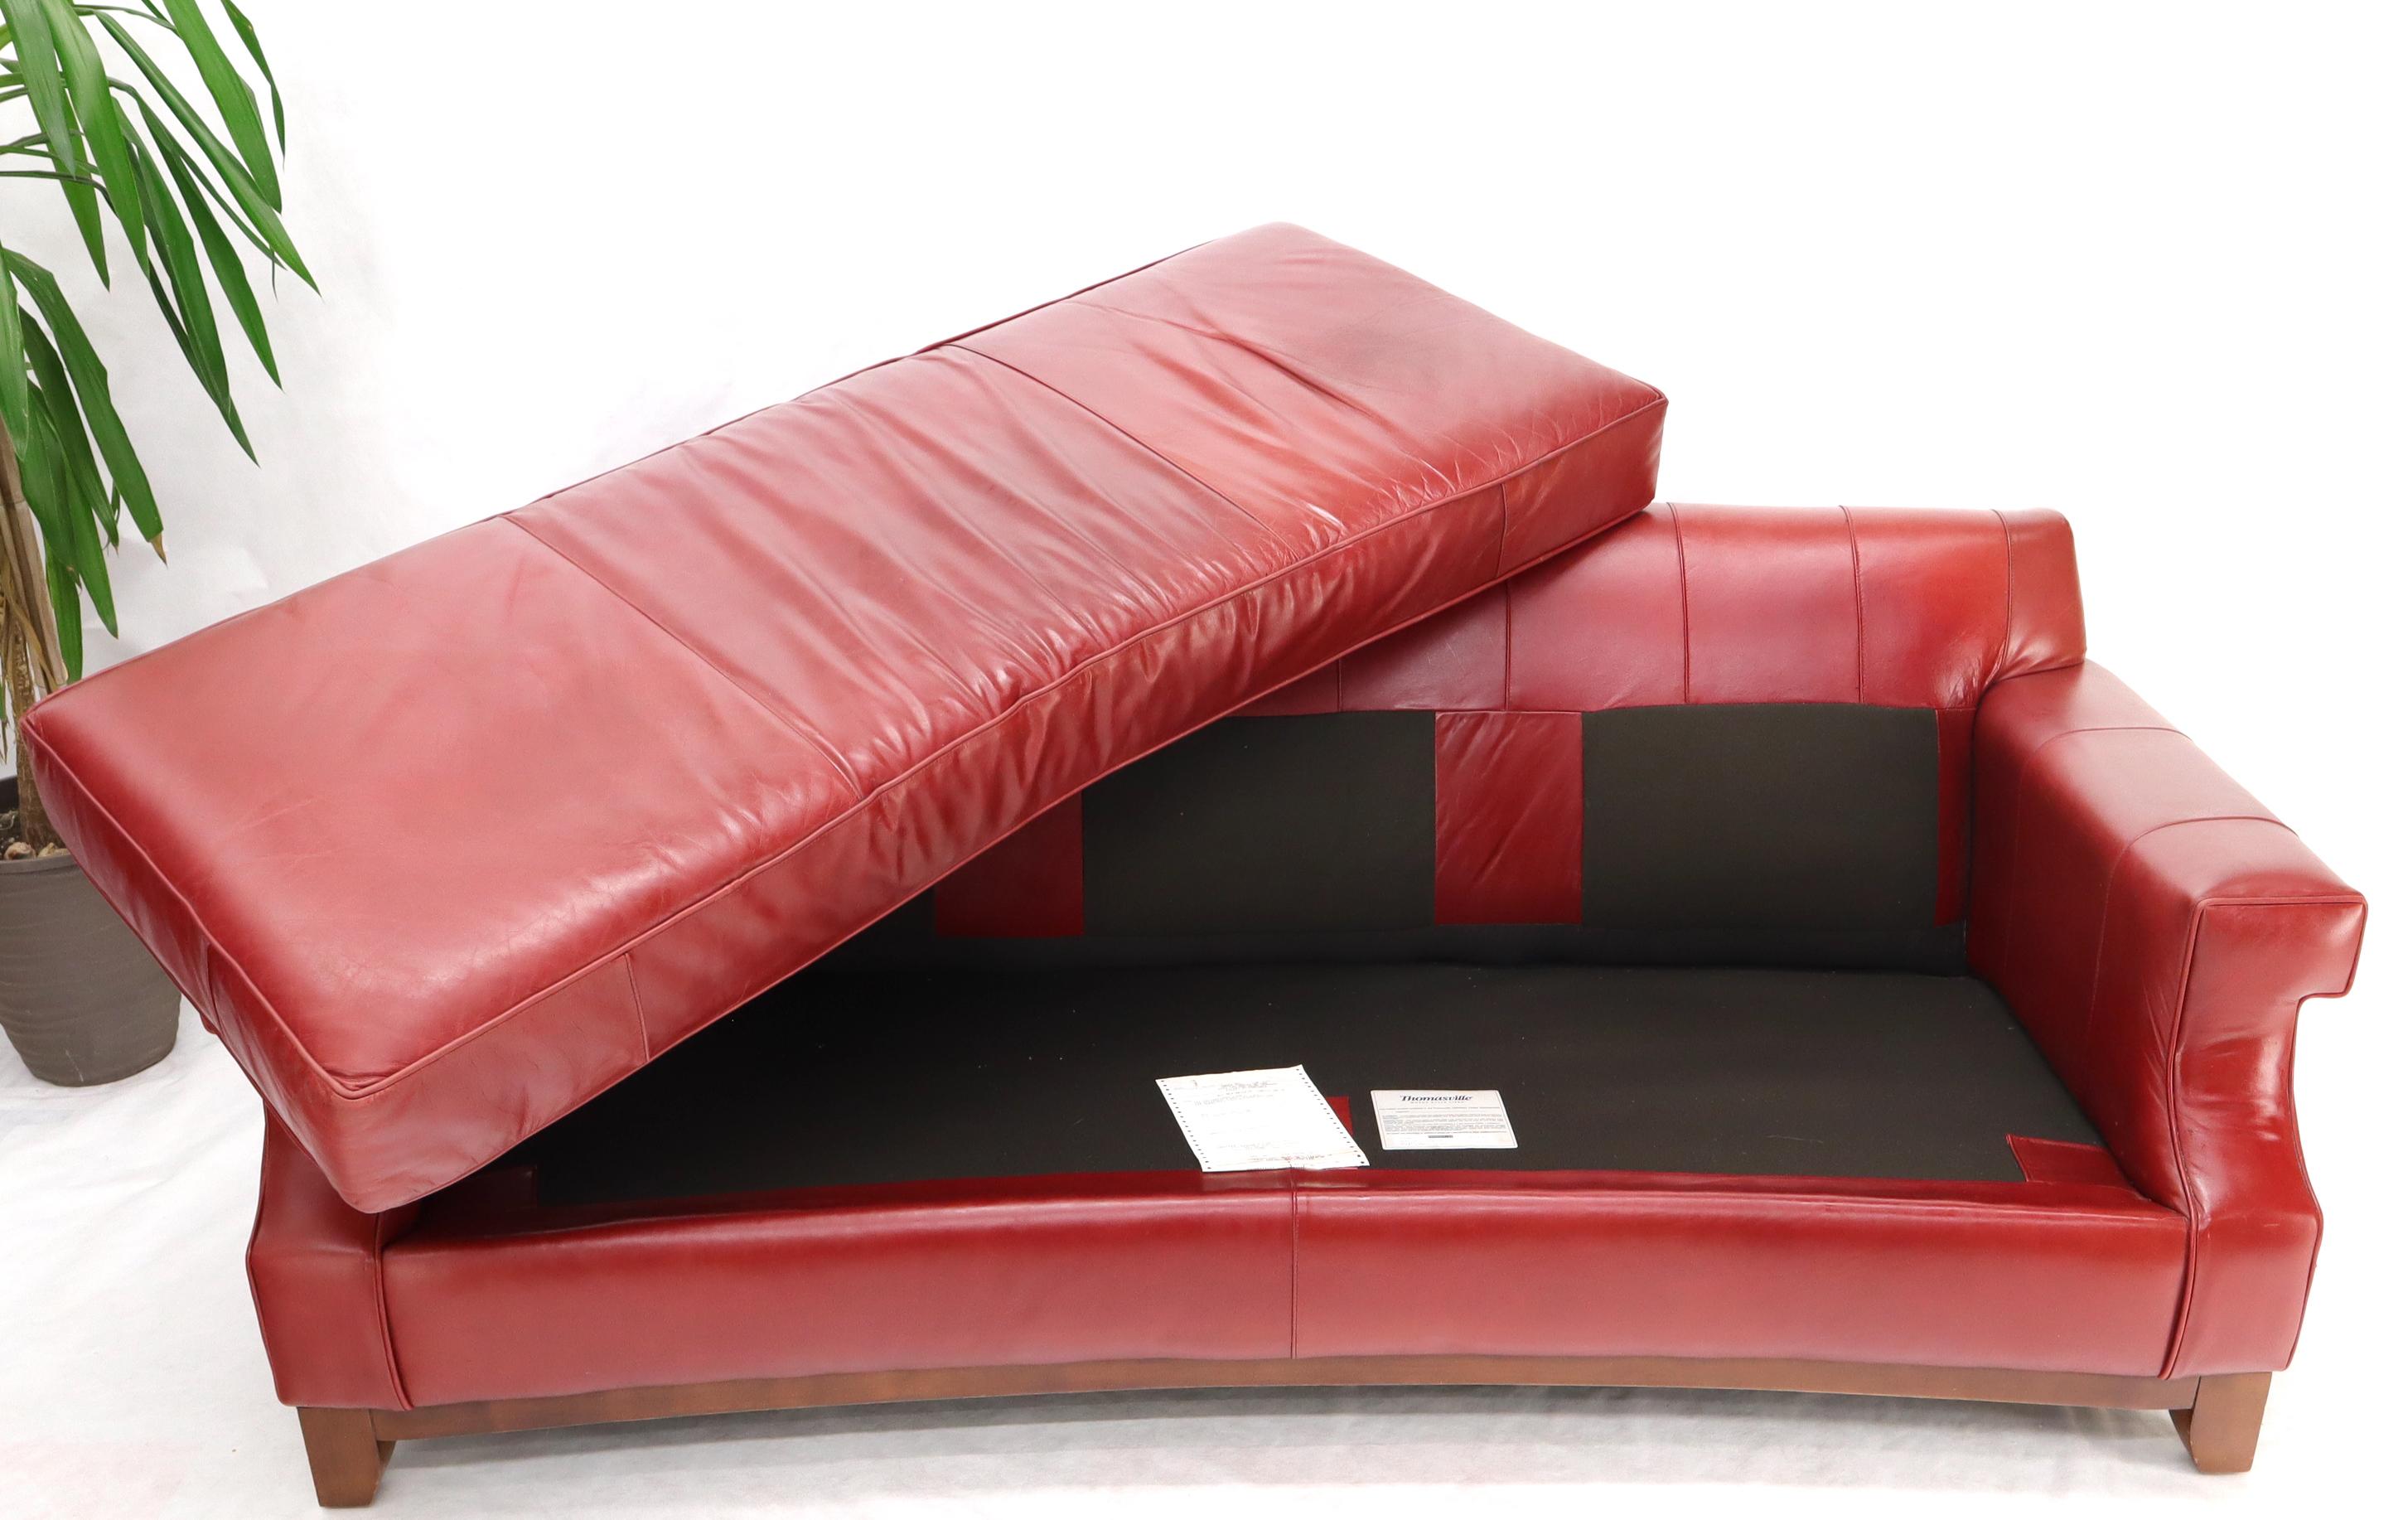 Concave Front Edge Tomato Red Leather Upholstery Couch Leather Sofa Thomasville 2